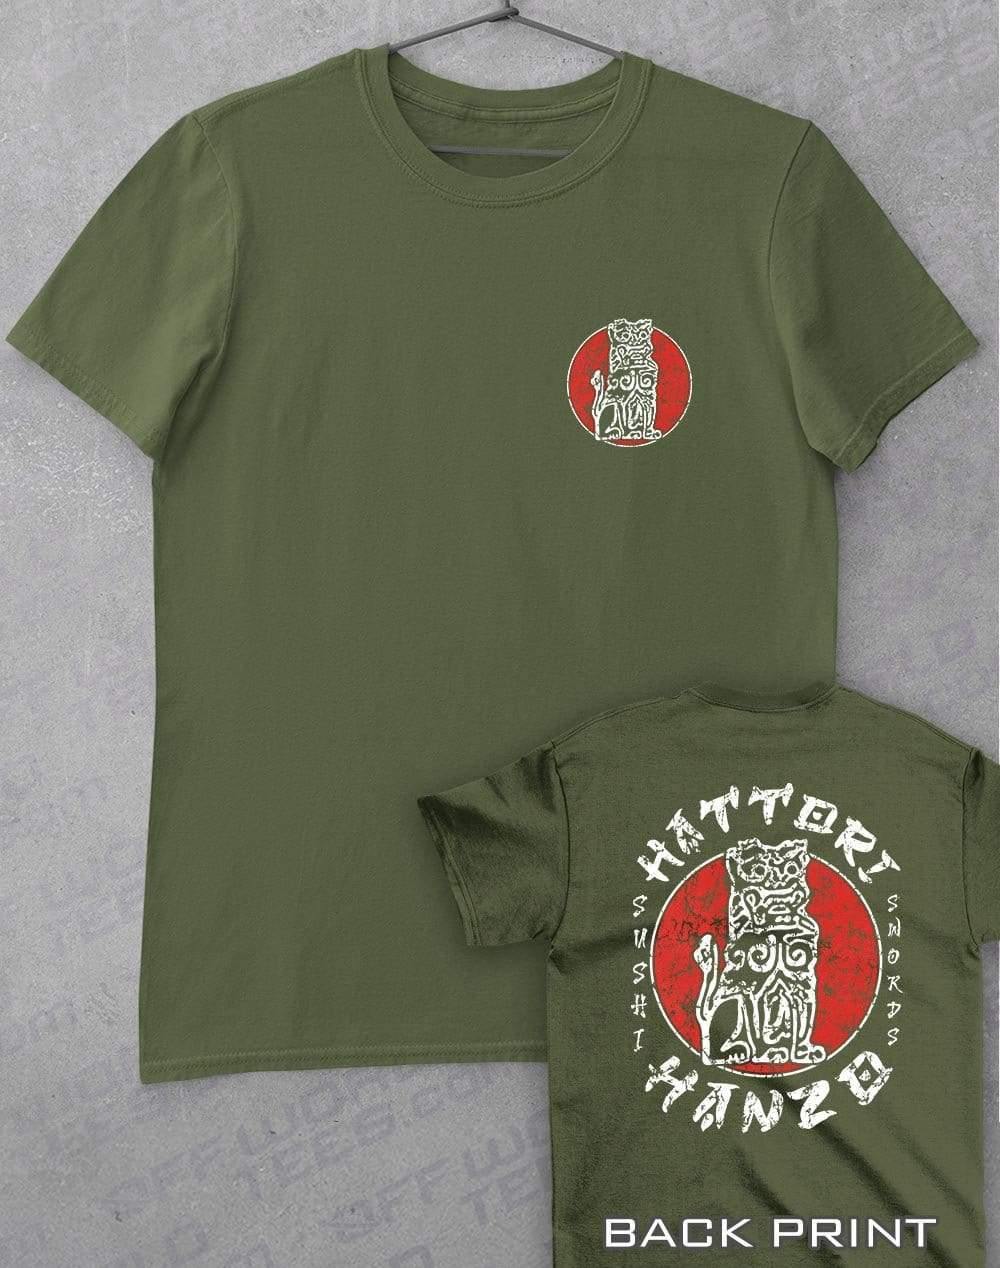 Hattori Hanzo with Back Print T-Shirt S / Military Green  - Off World Tees